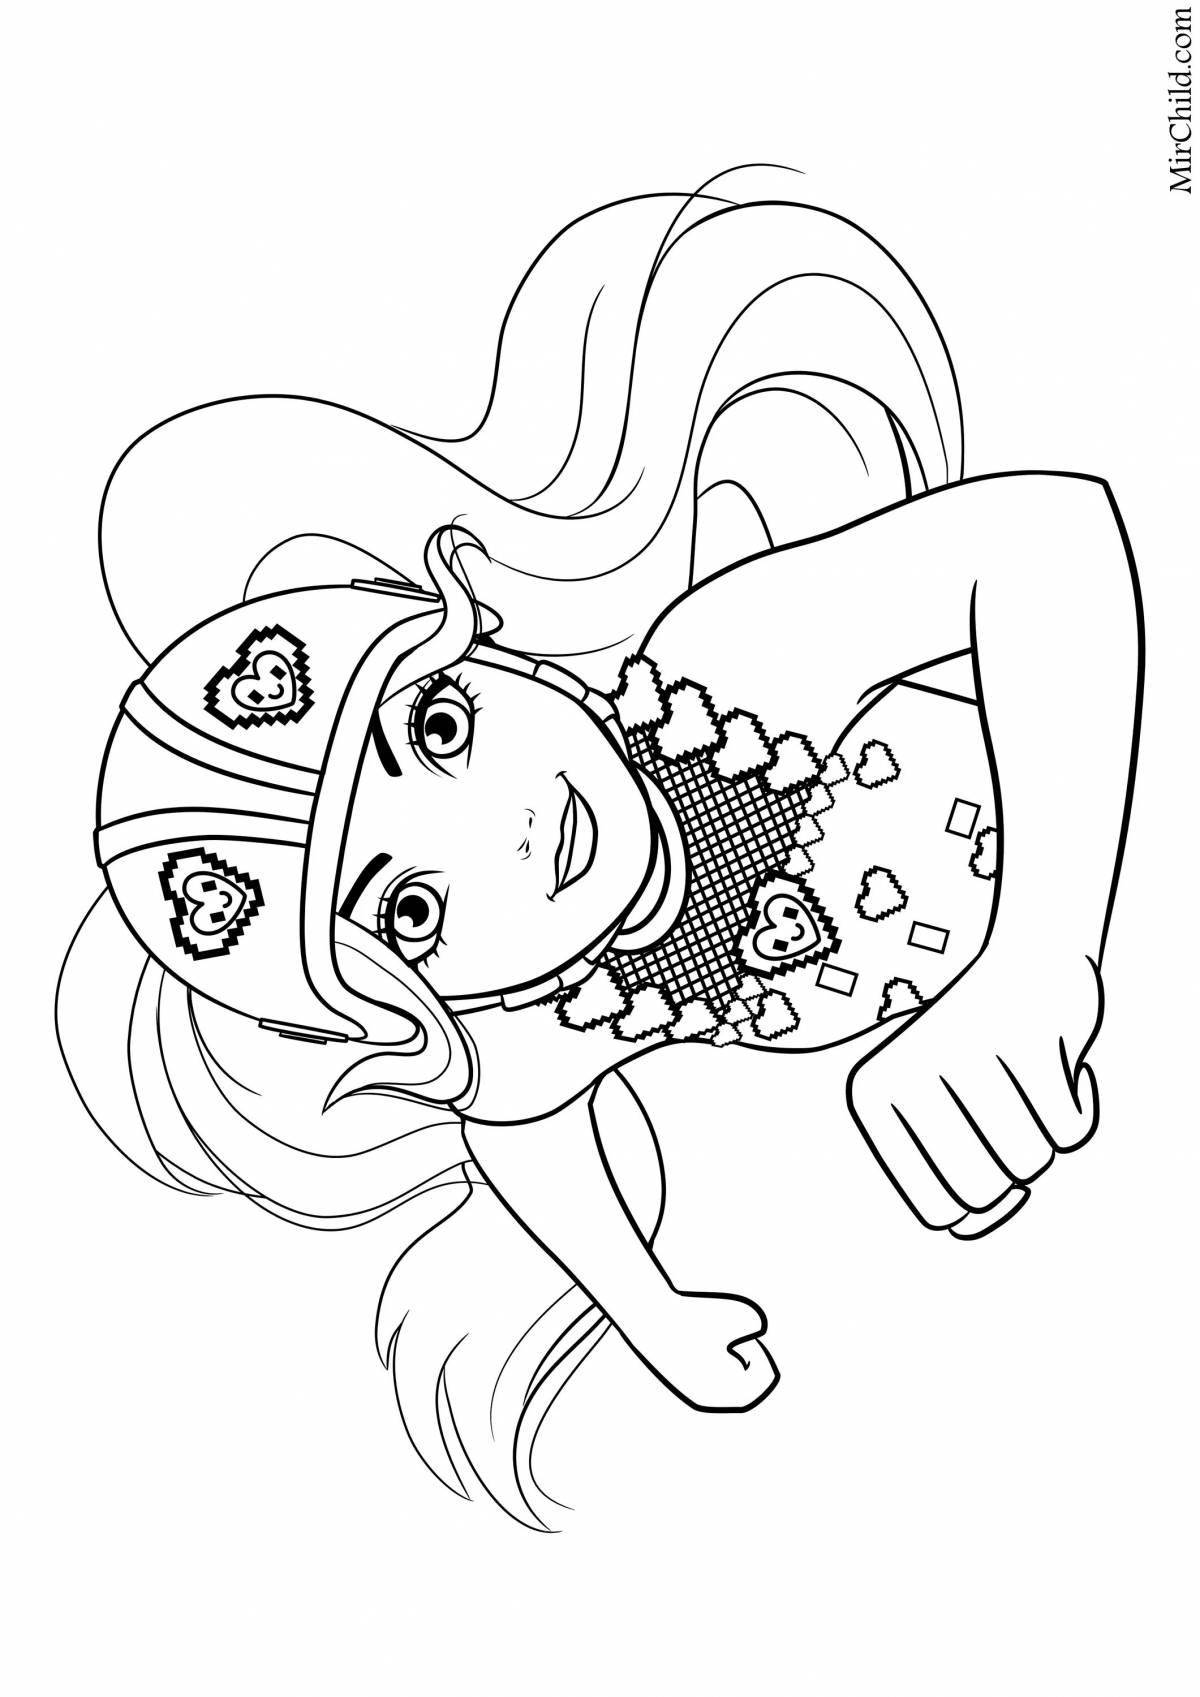 Cute chelsea doll coloring book